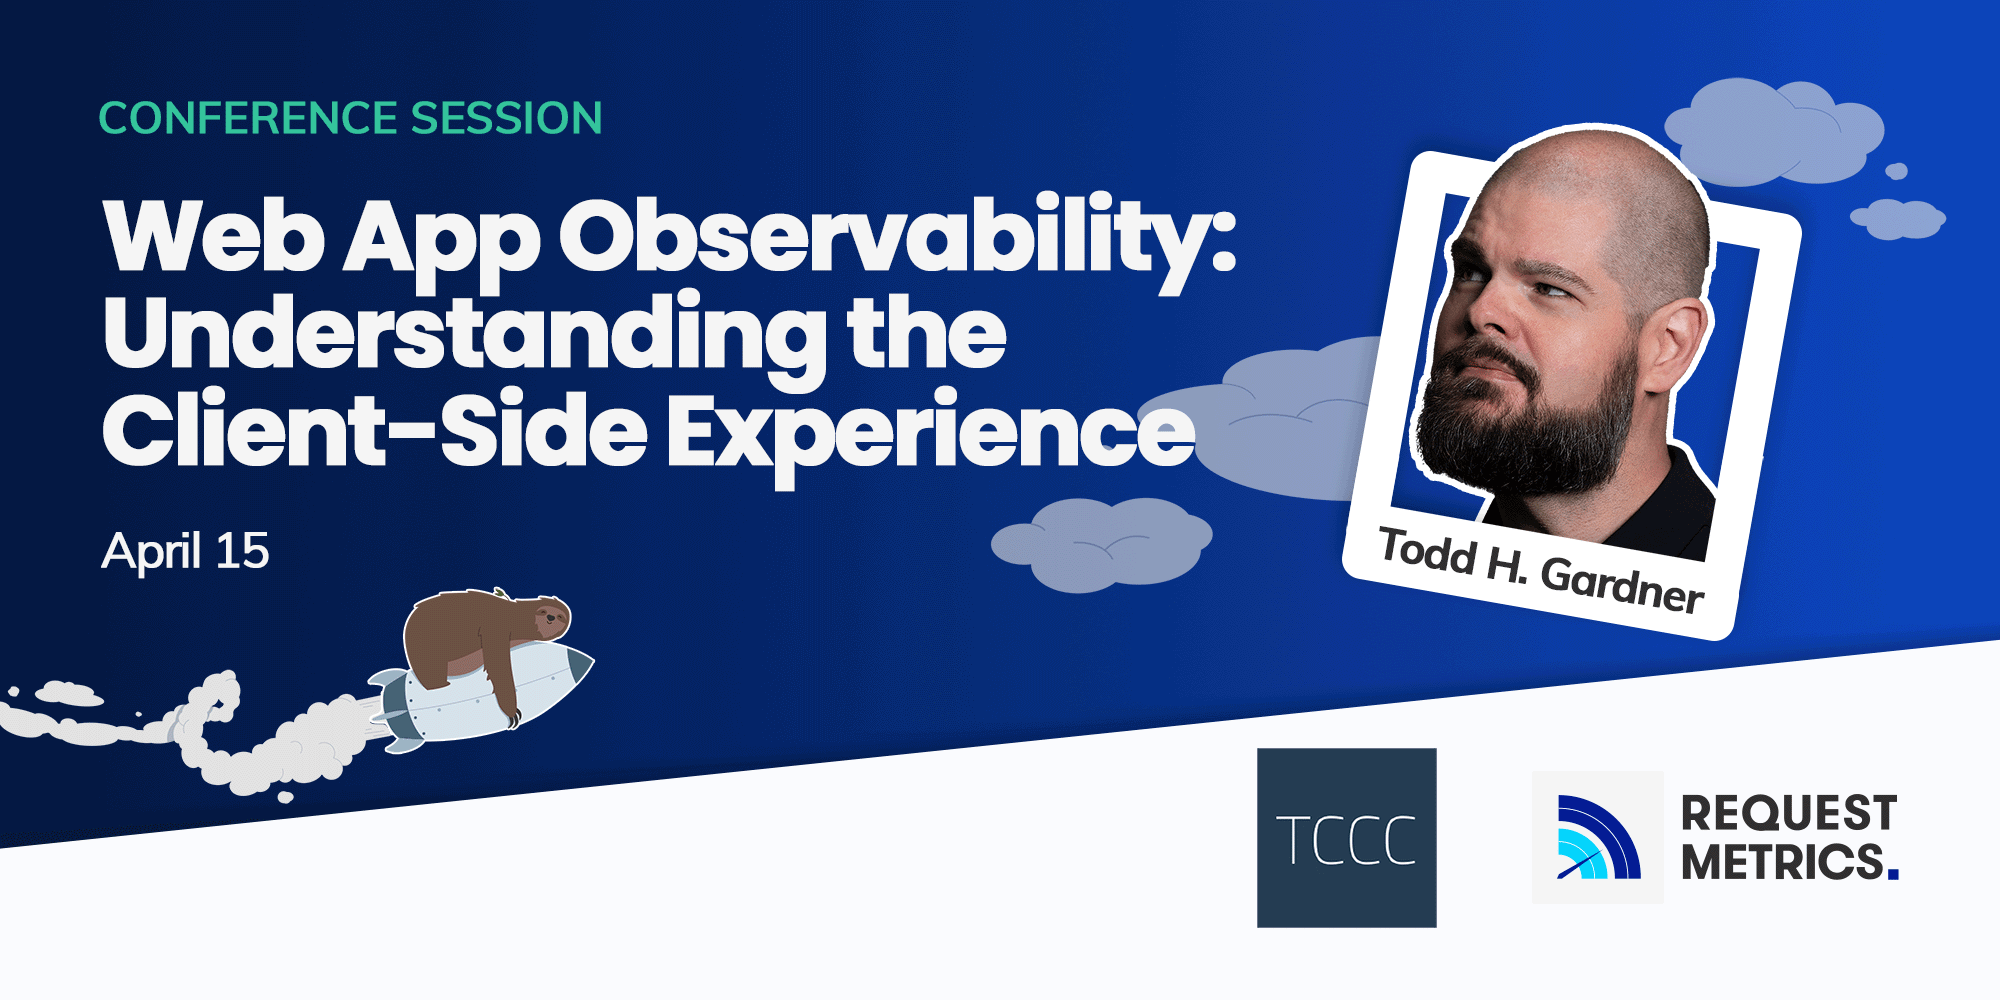 Web App Observability: Understanding the Client-Side Experience